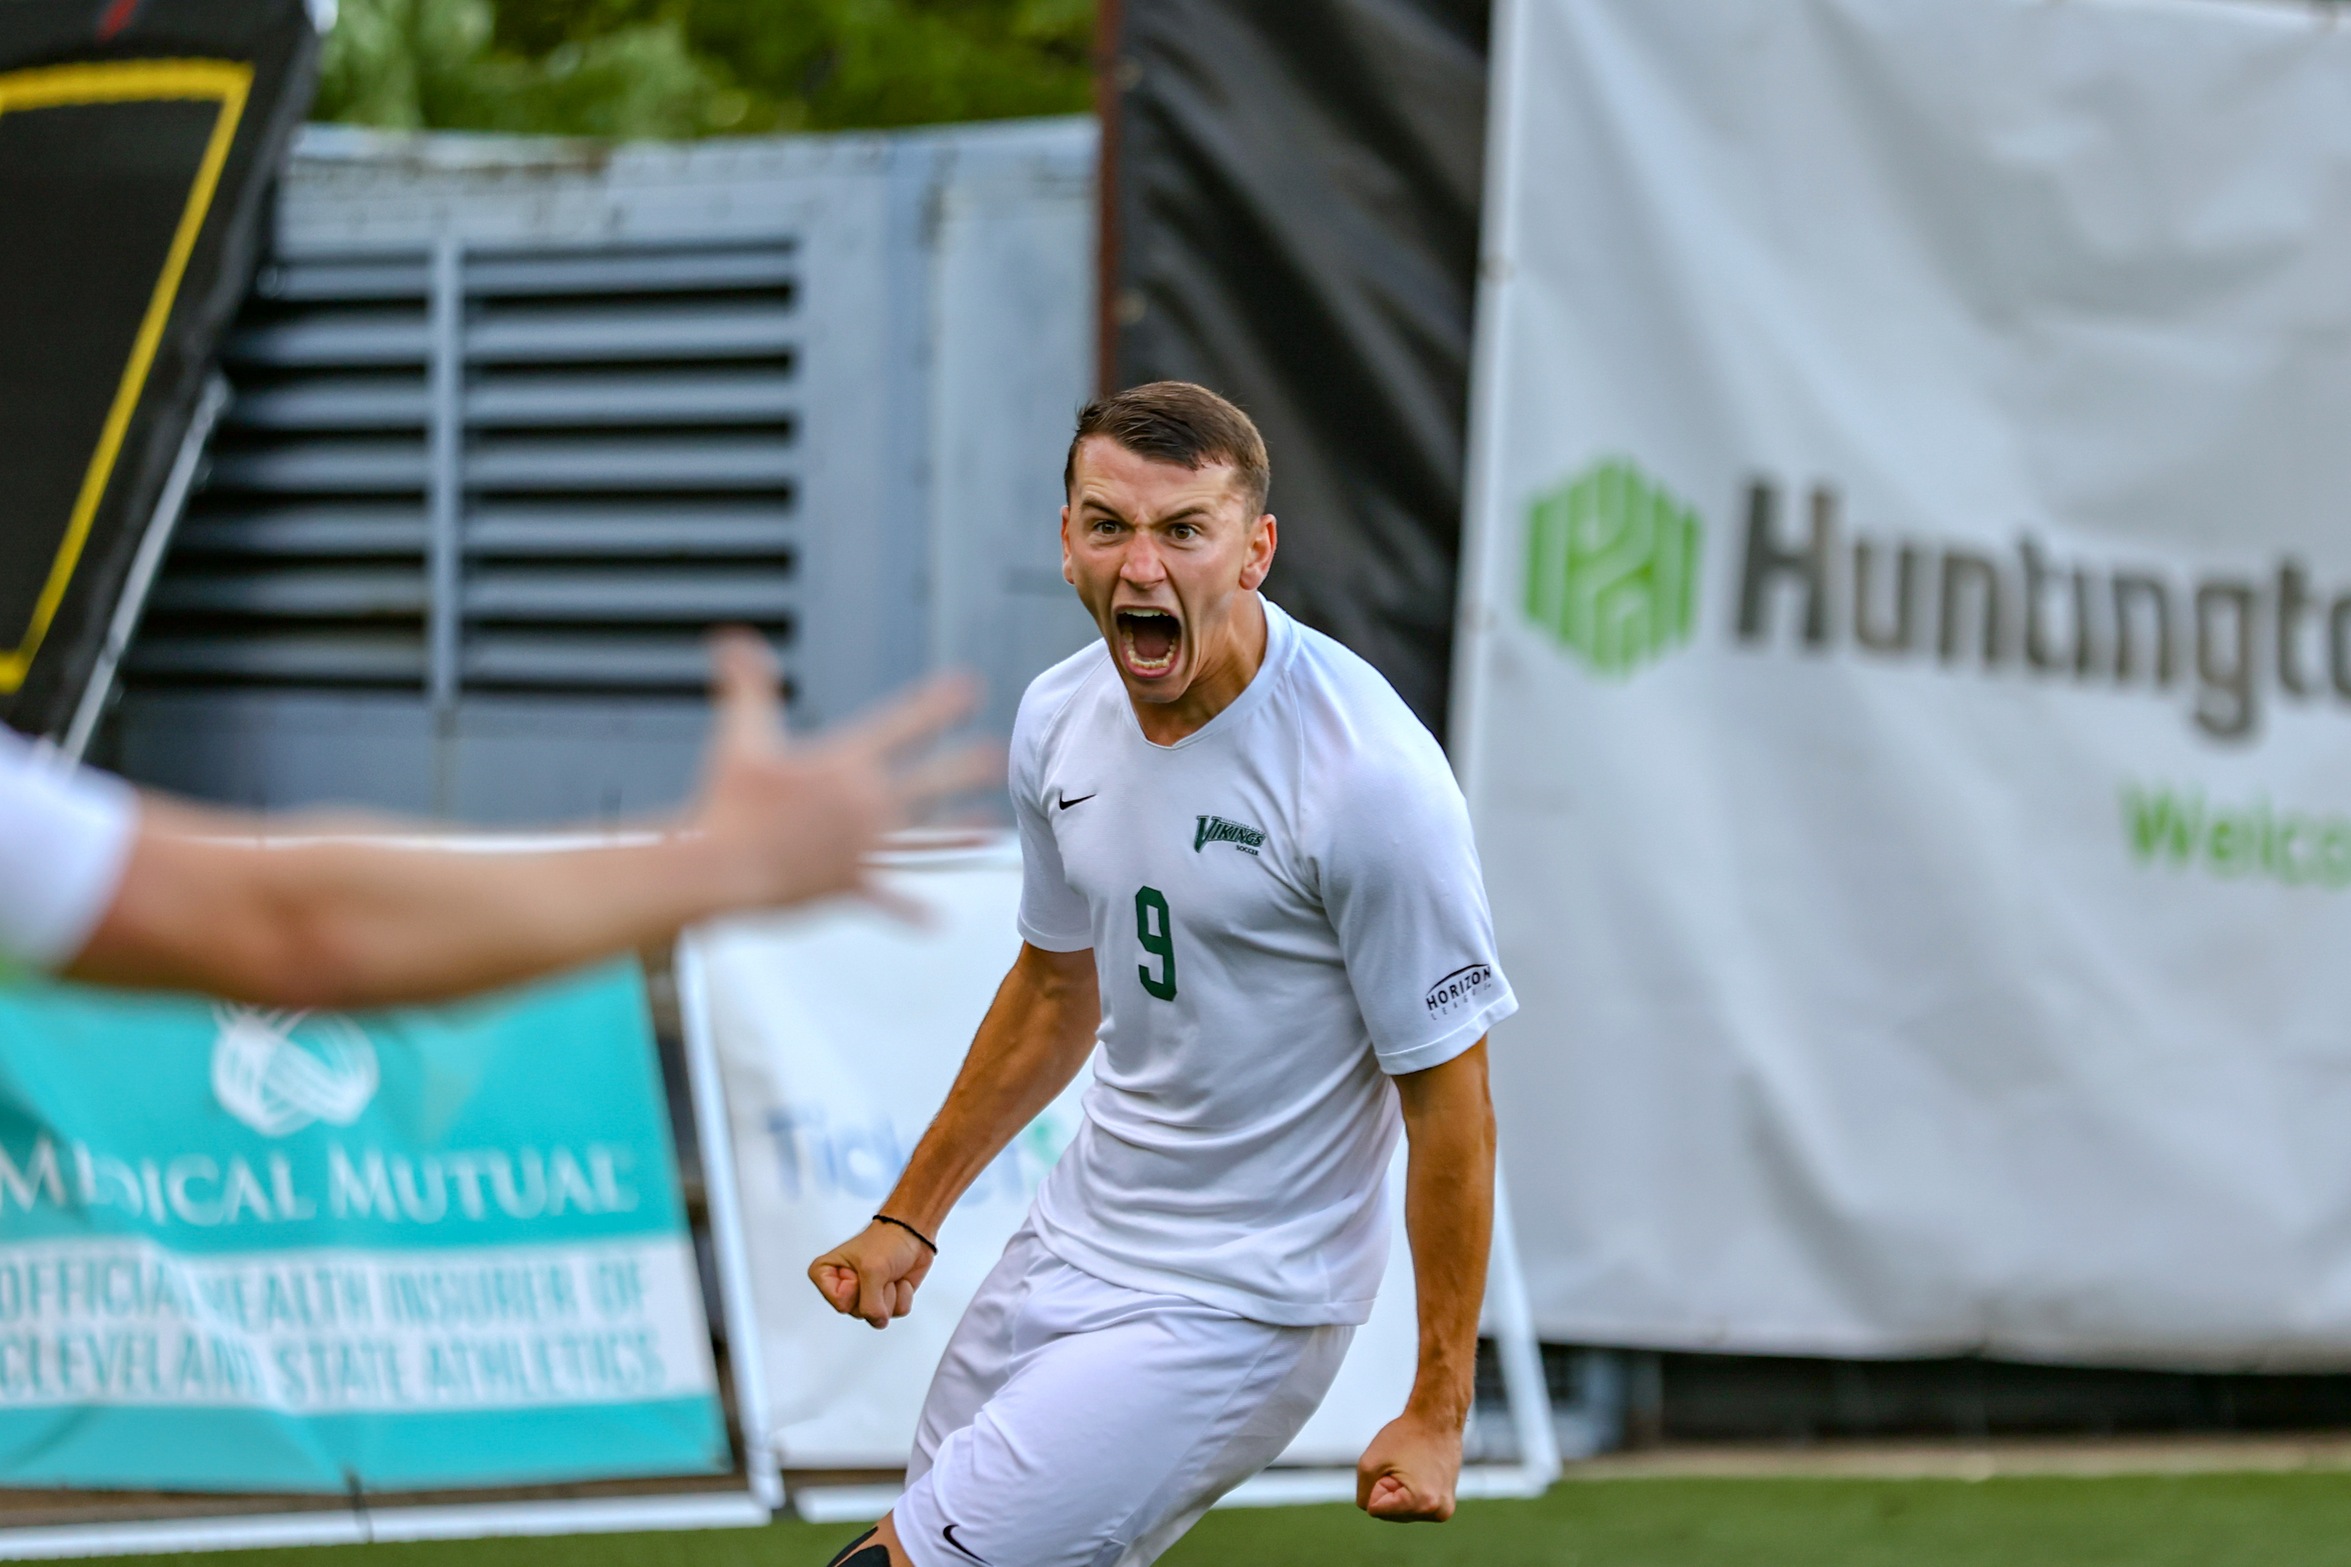 Cleveland State Men's Soccer Falls to No. 8 Marshall, 3-1